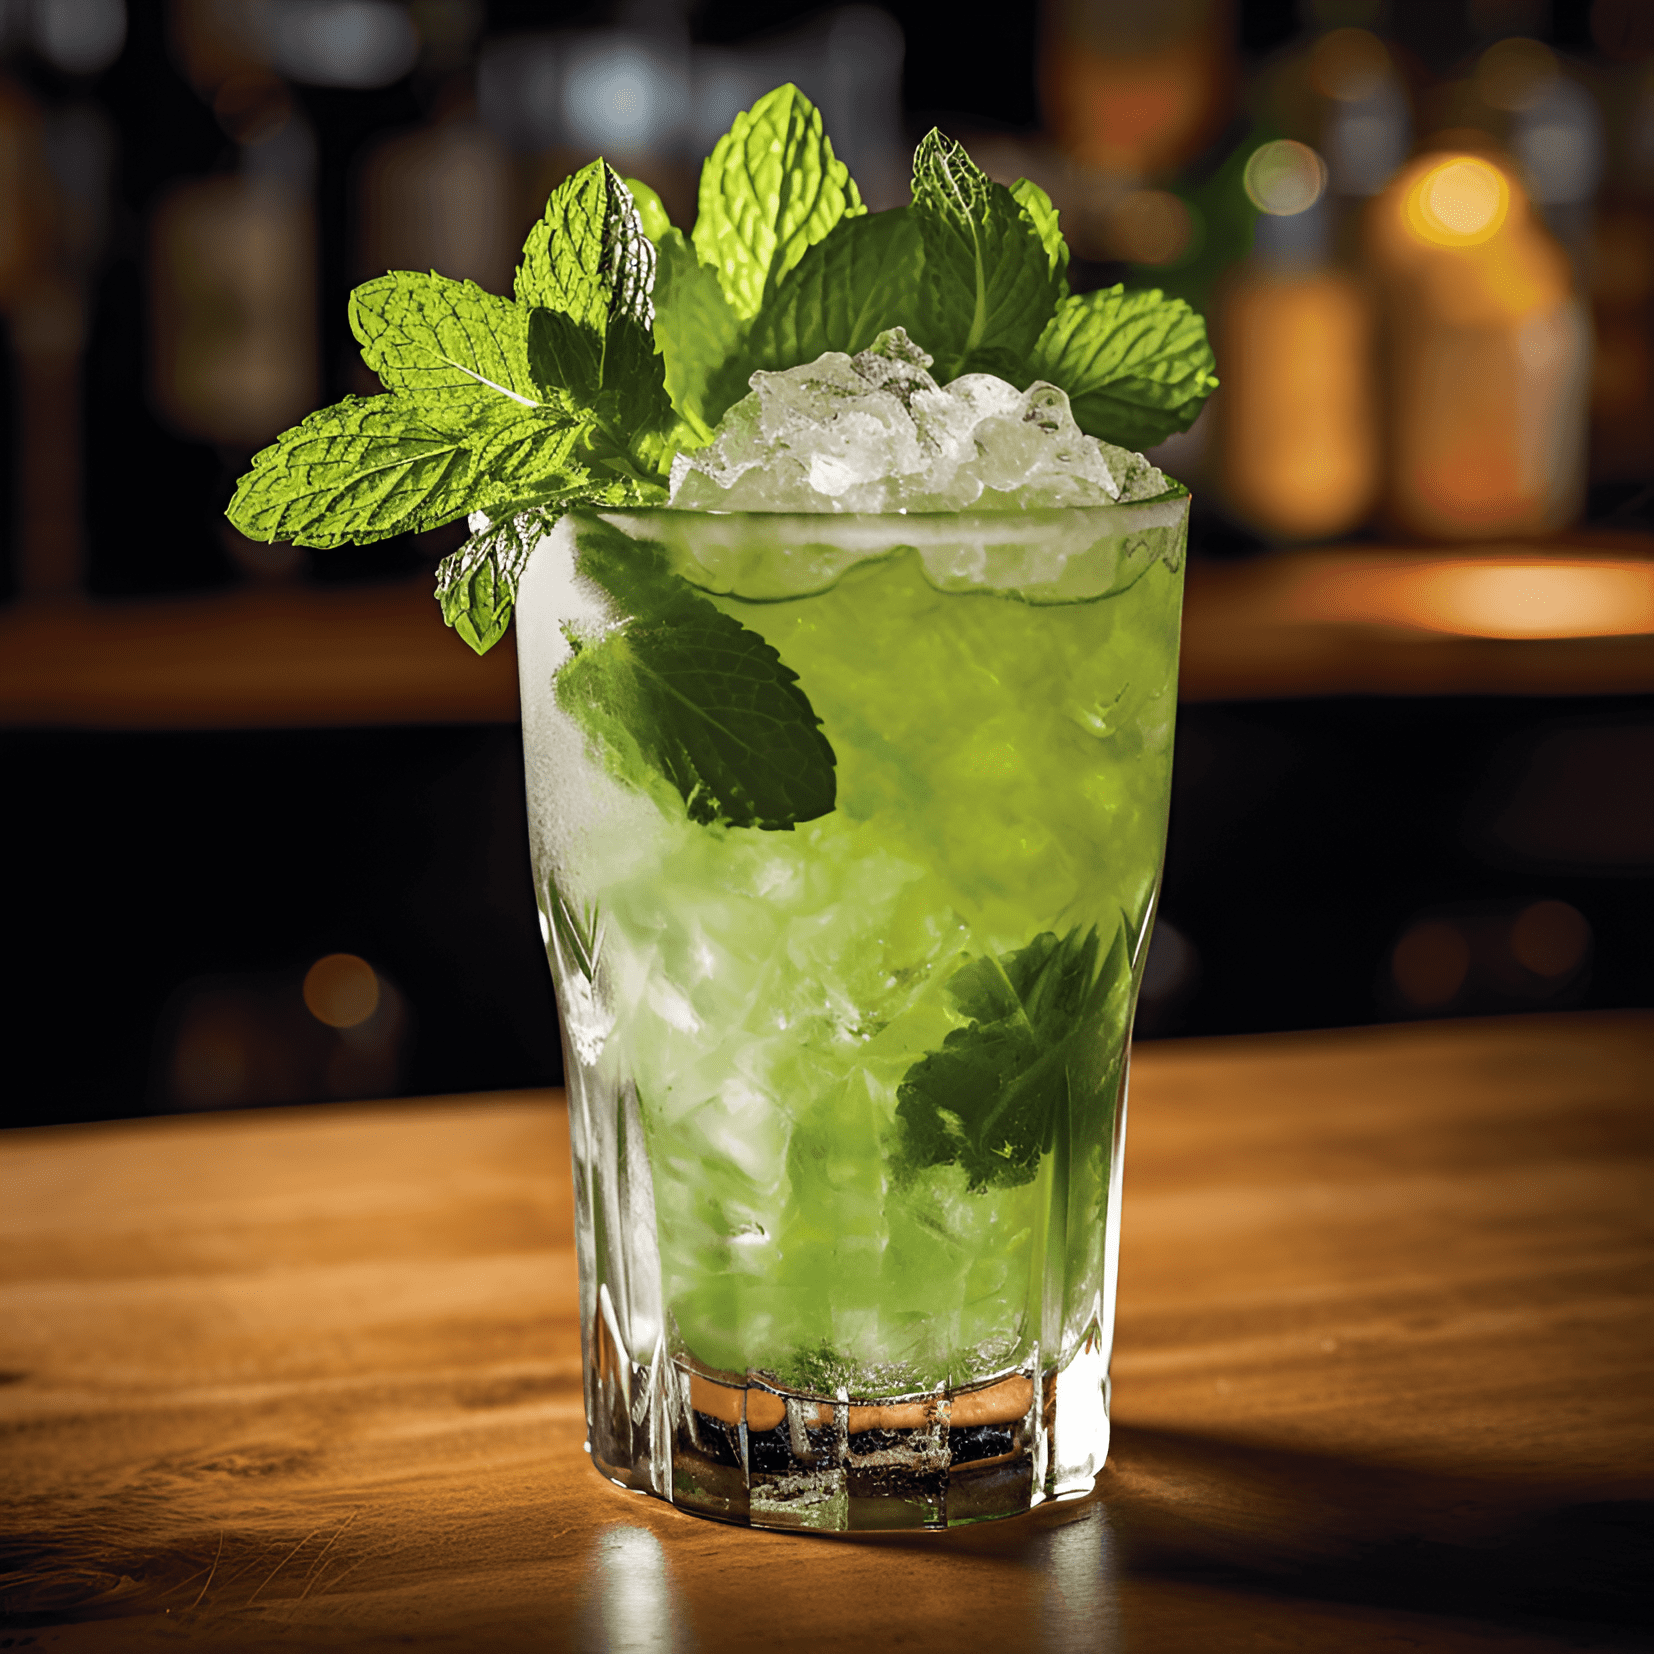 Green Swizzle Cocktail Recipe - The Green Swizzle is a delightful mix of sweet, sour, and slightly bitter flavors. The combination of rum, lime, and mint creates a refreshing and invigorating taste, while the bitters add a subtle complexity to the drink.